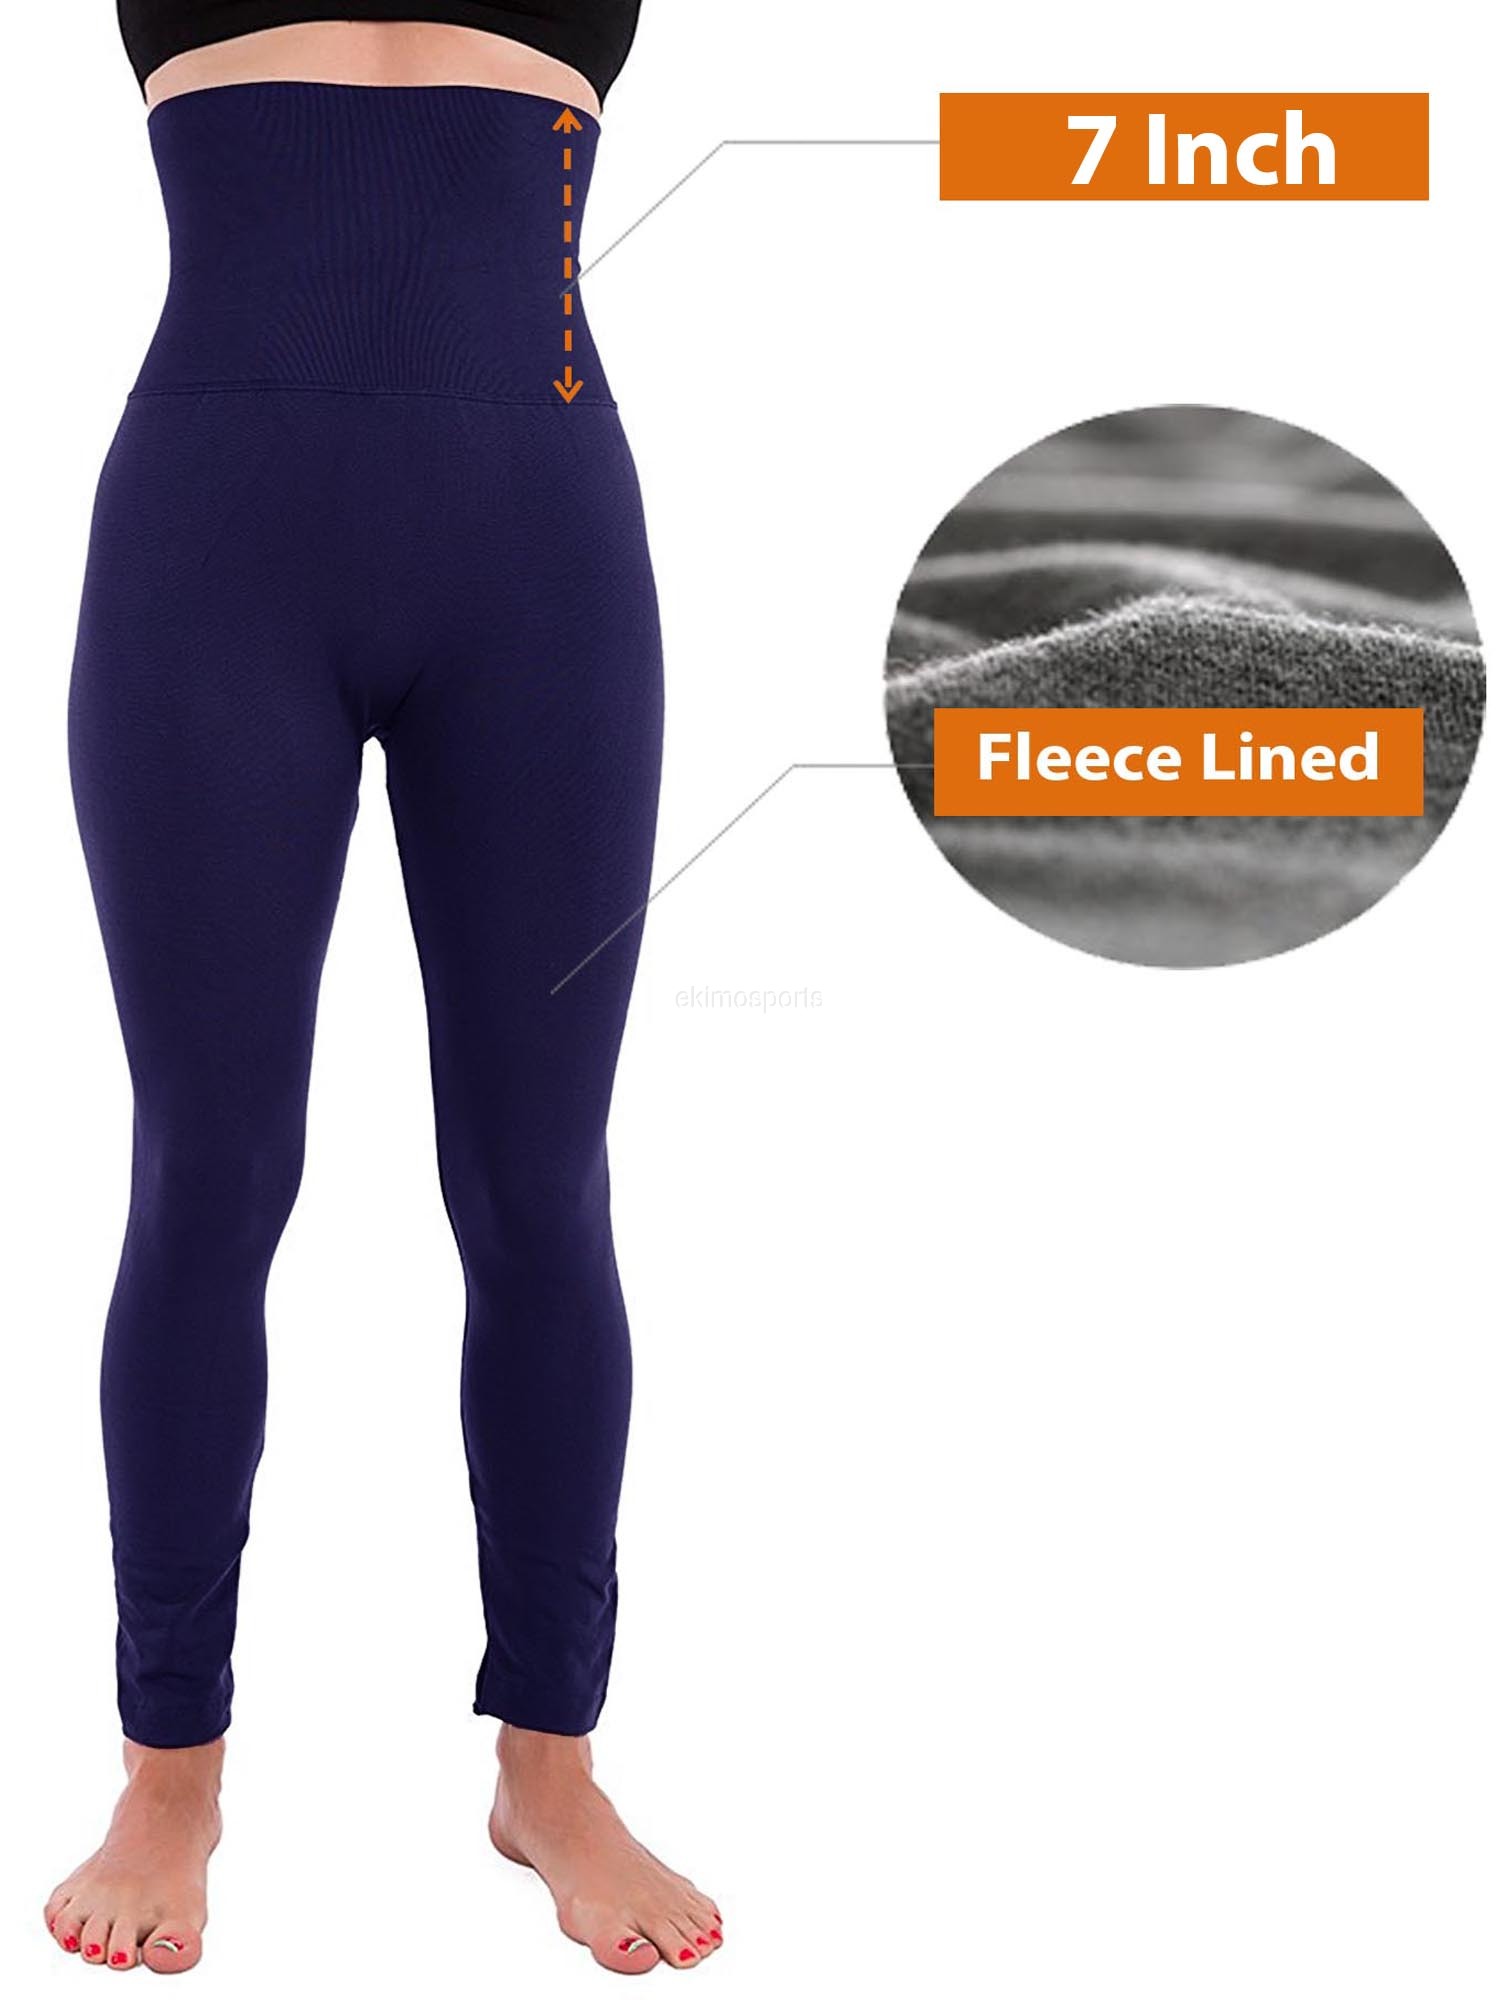 High Waist Tummy Control Full Length Legging Compression Top Pants Fleece Lined Plus Size XL 2XL - image 3 of 4